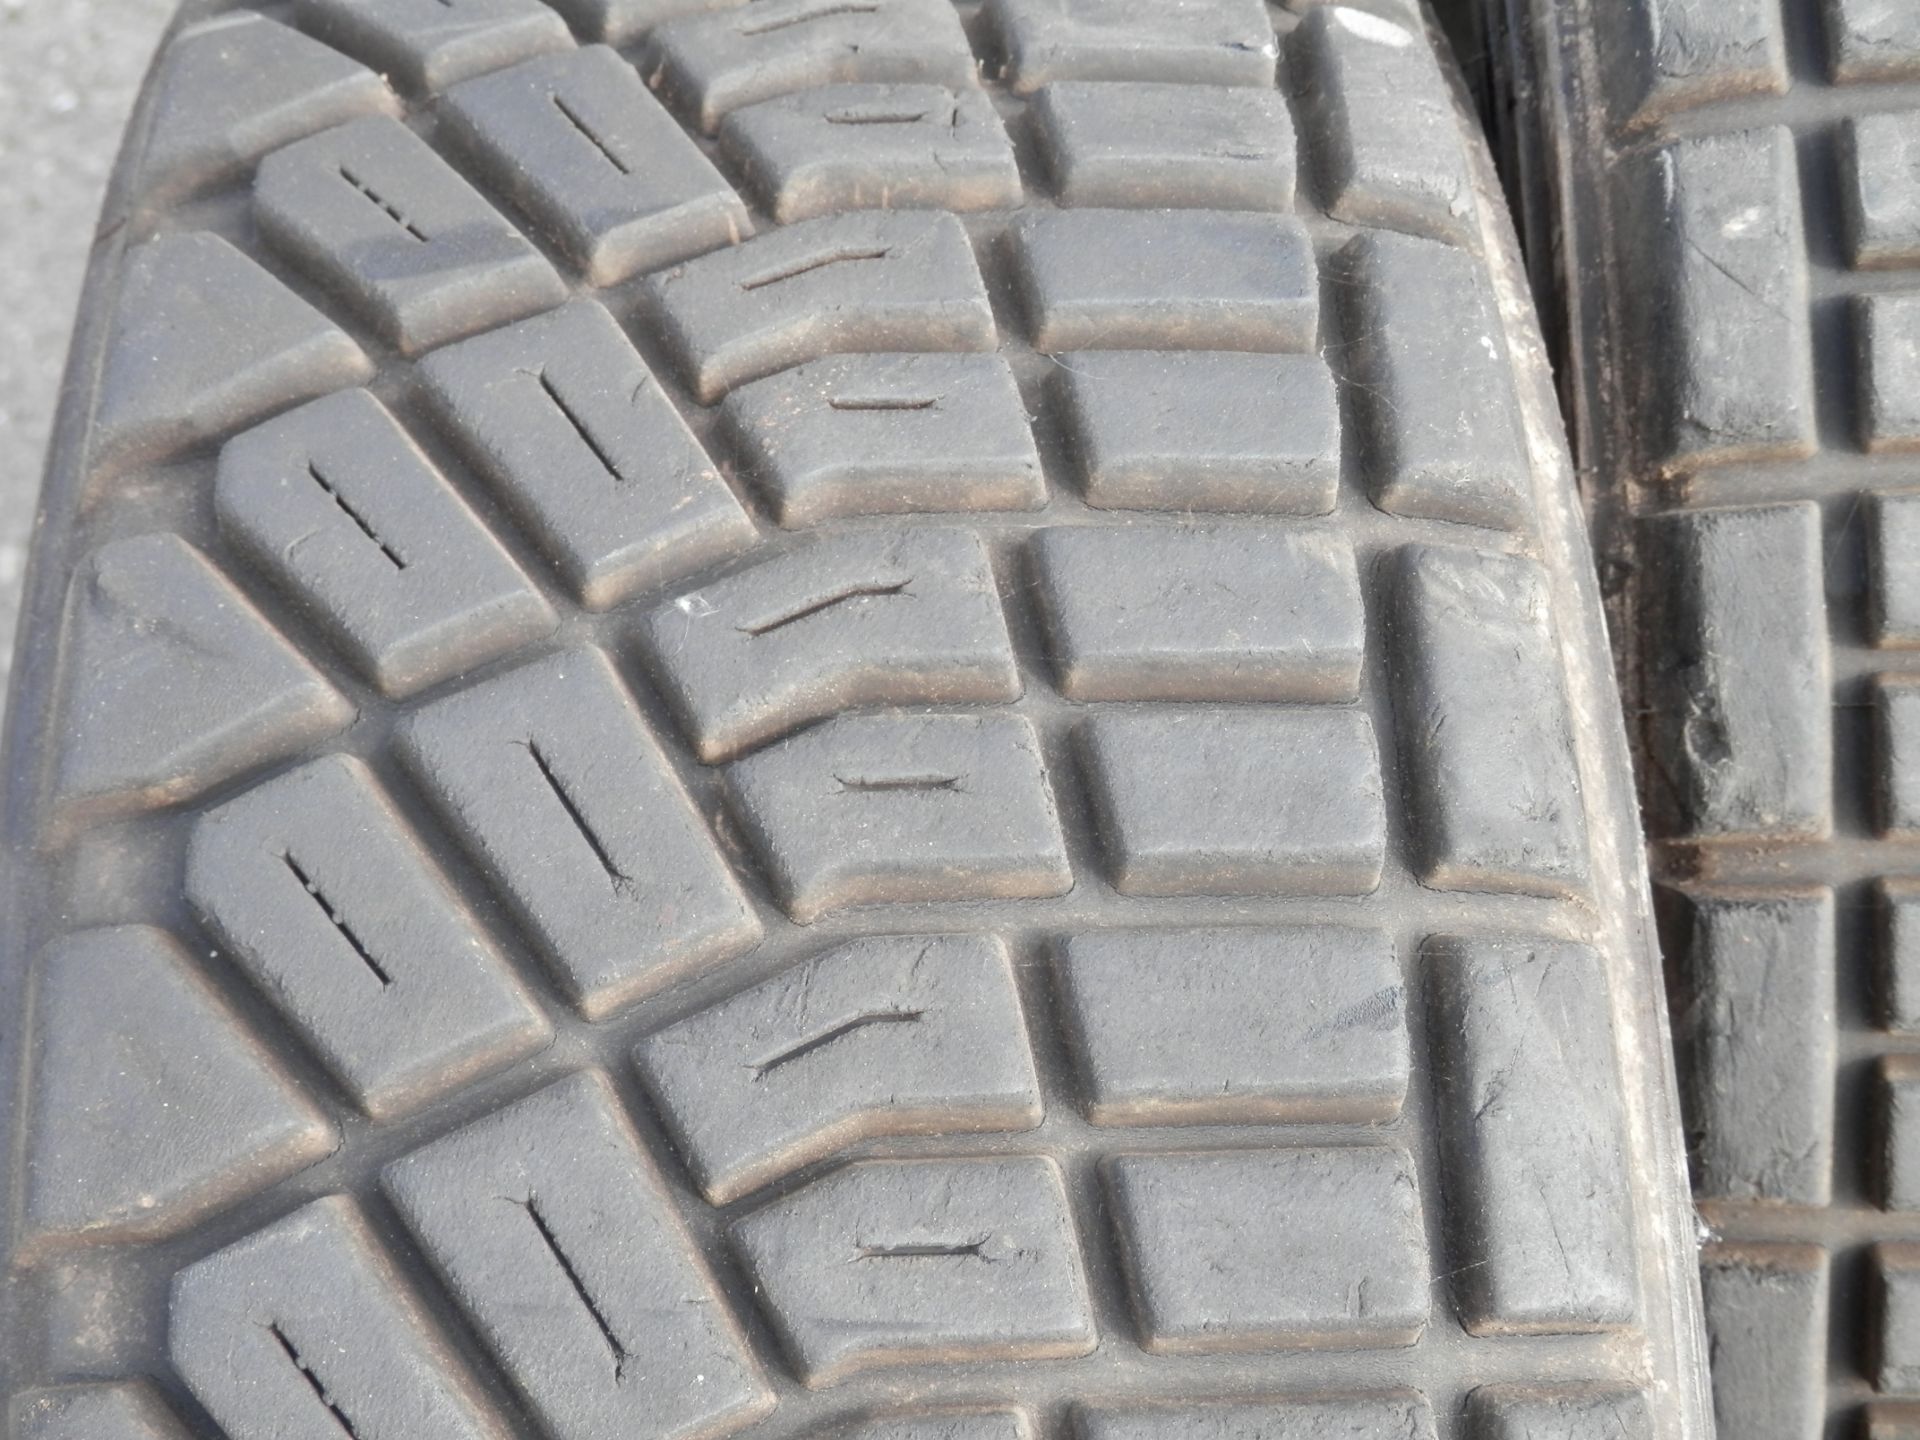 4 X DUNLOP DIREZZA RALLYE/OFF ROAD TYRES, 185/65/15 FROM A 2000 MITSUBISHI EVOLUTION. - Image 6 of 8